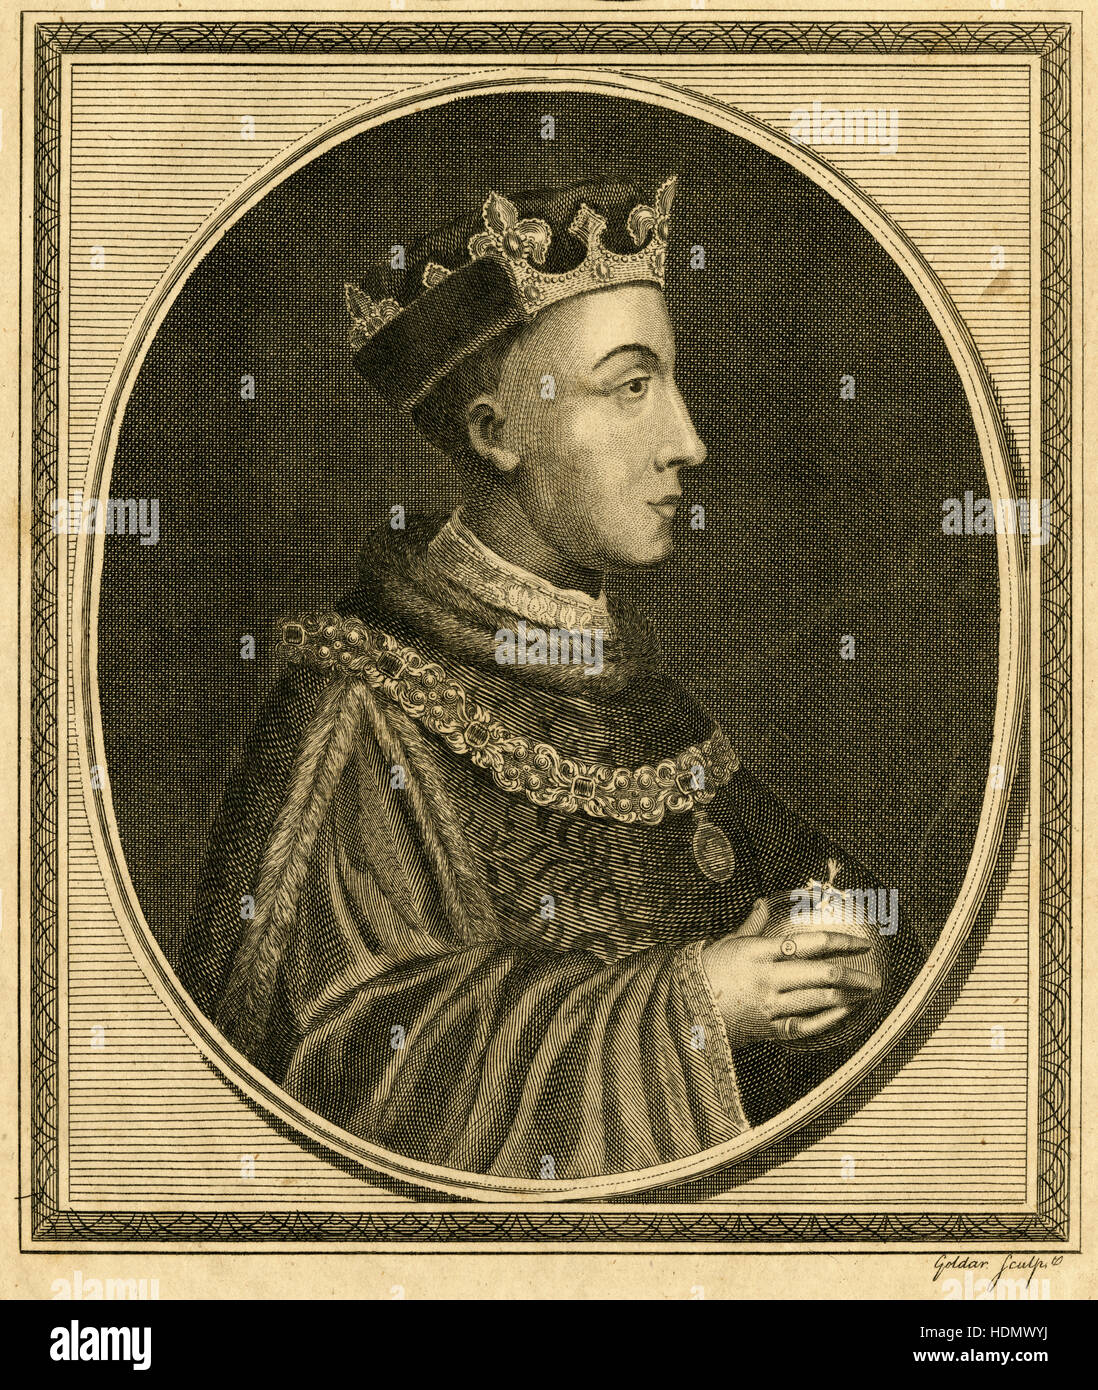 Antique 1785 engraving, King Henry V. Henry V (1386-1422) was King of England from 1413 until his death at the age of 36 in 1422. He was the second English monarch who came from the House of Lancaster. SOURCE: ORIGINAL ENGRAVING. Stock Photo